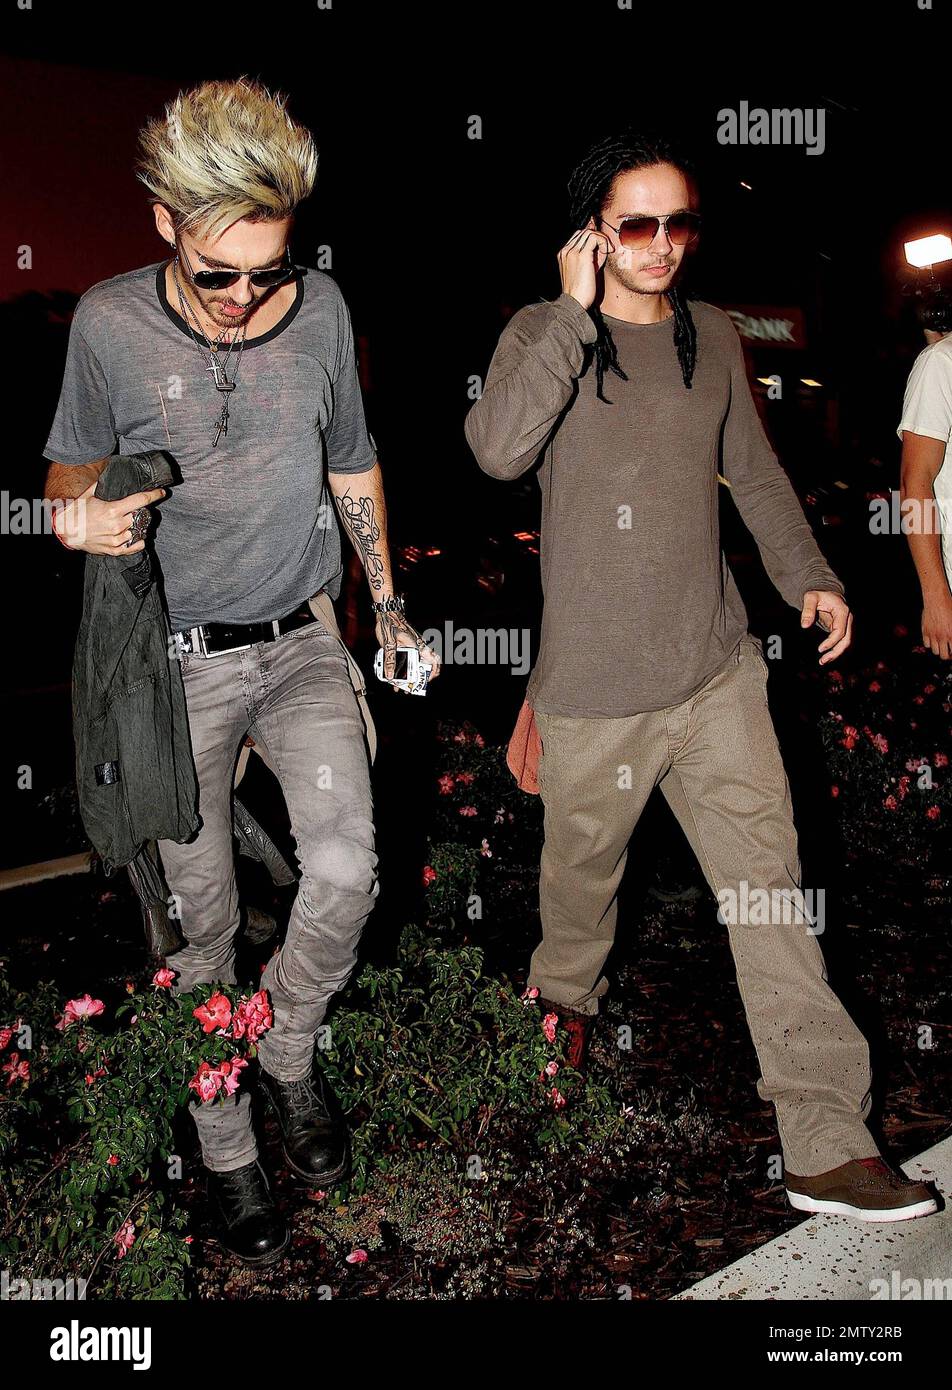 Tom Kaulitz and Bill Kaulitz of the German rock band 'Tokio Hotel' were spotted outside Bootsy Bellows Nightclub in West Hollywood, CA. 14th August 2012. Stock Photo